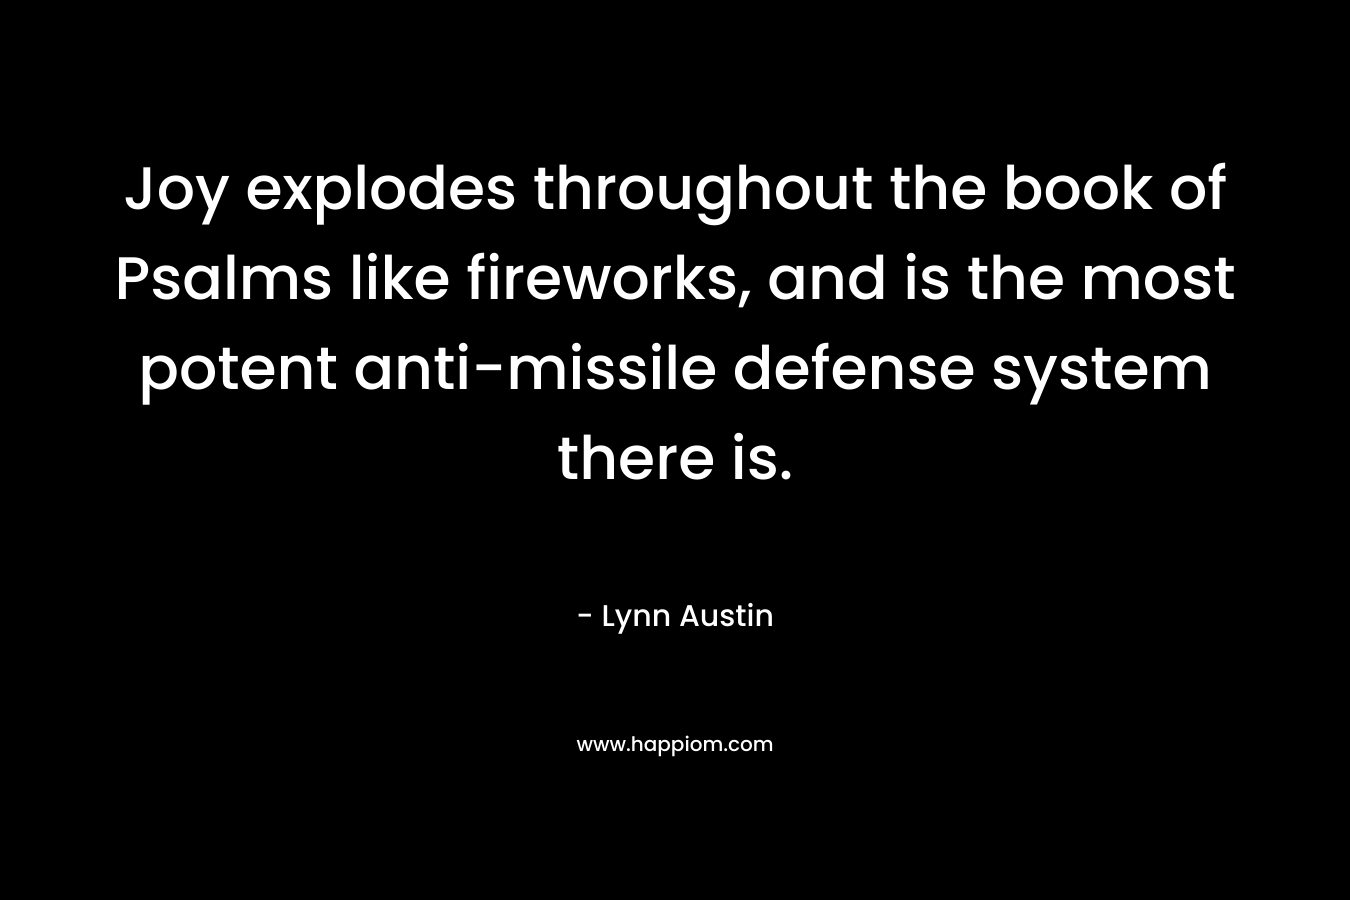 Joy explodes throughout the book of Psalms like fireworks, and is the most potent anti-missile defense system there is. – Lynn Austin